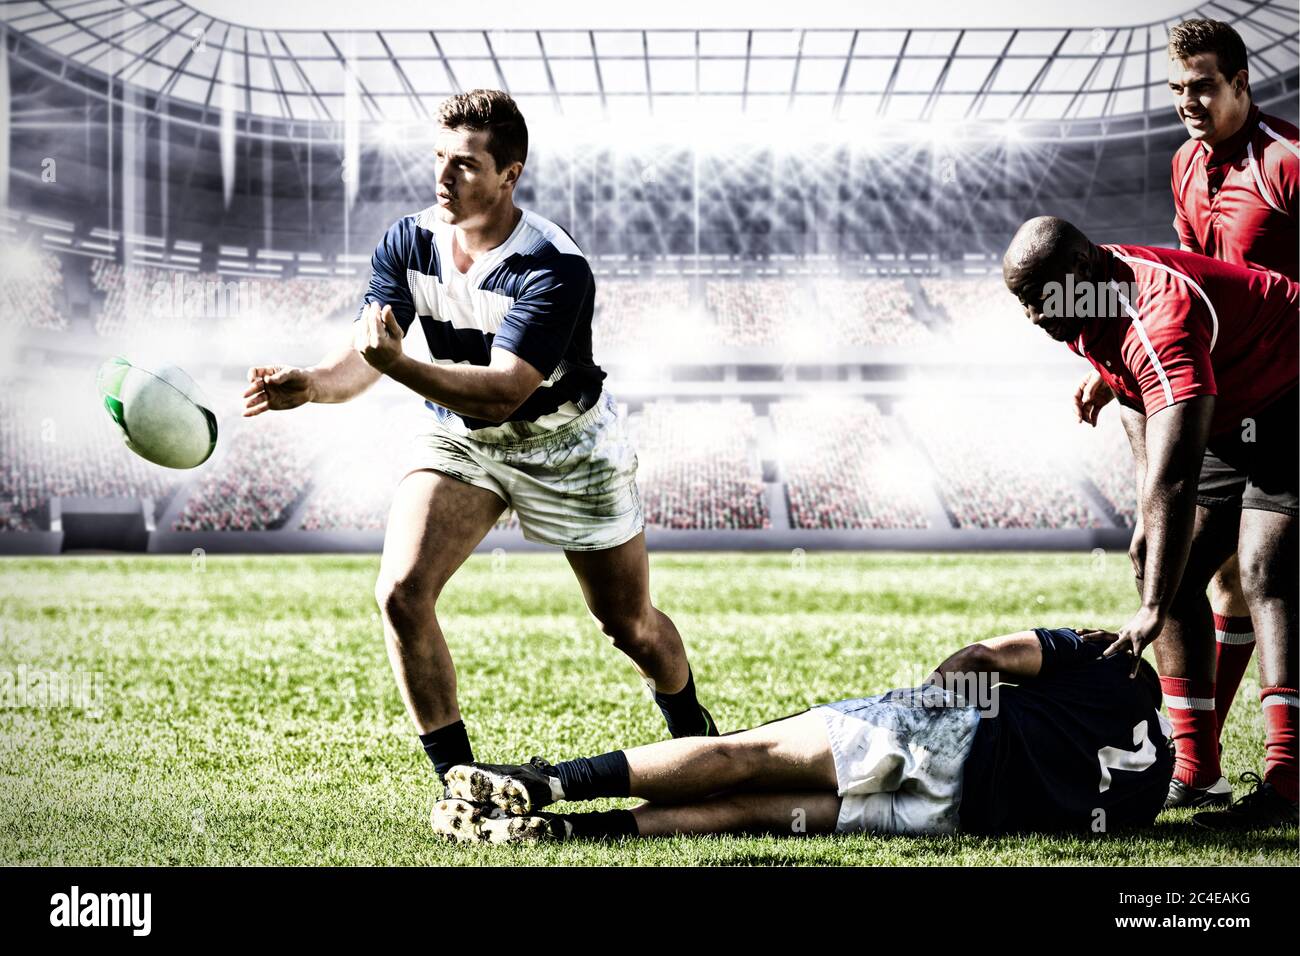 Digital composite image of team of rugby players playing rugby in sports stadium Stock Photo